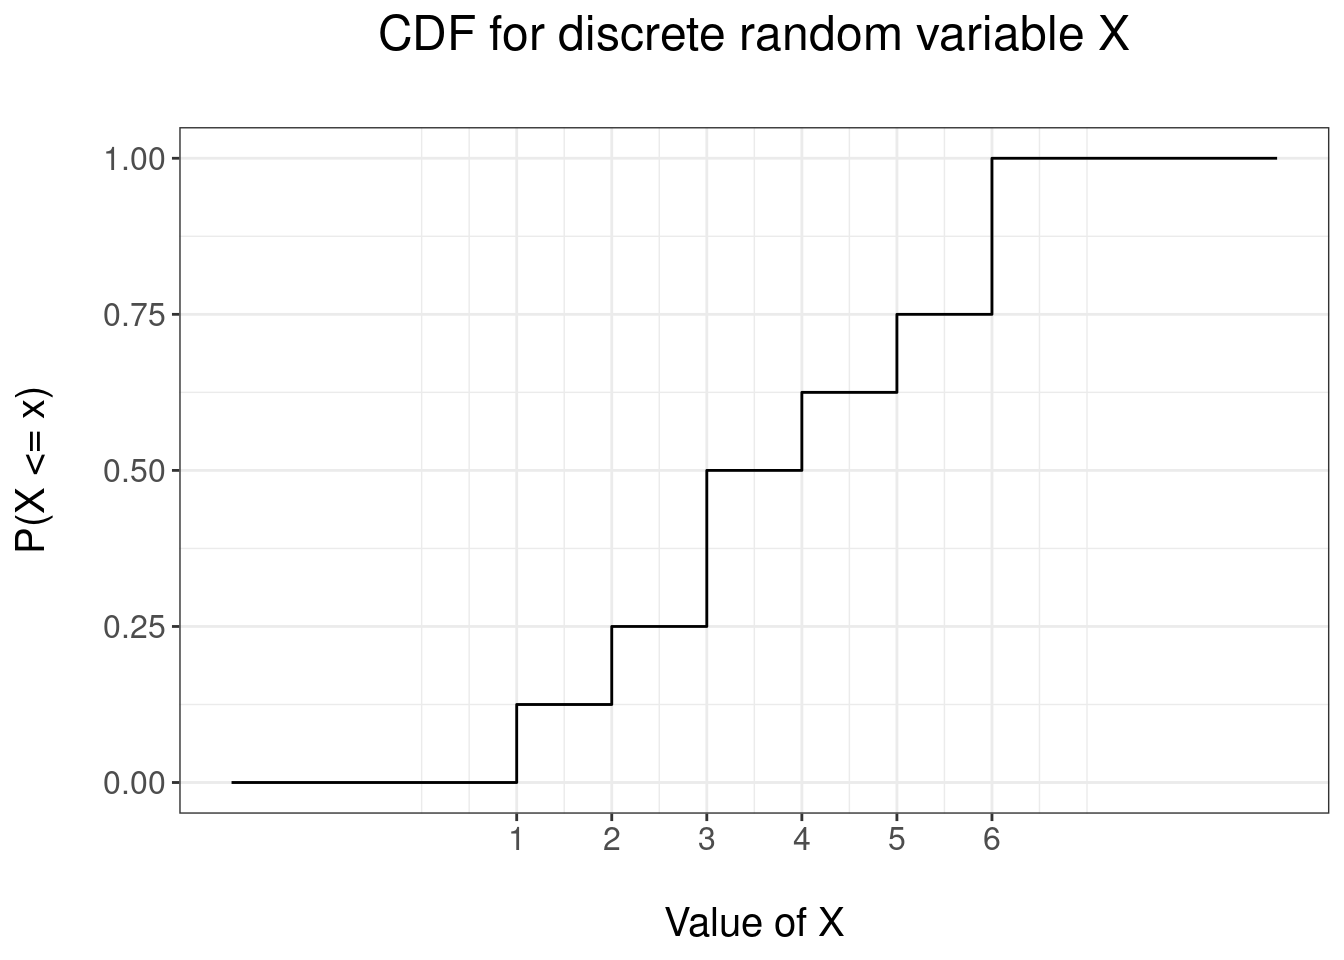 CDF for the biased dice example